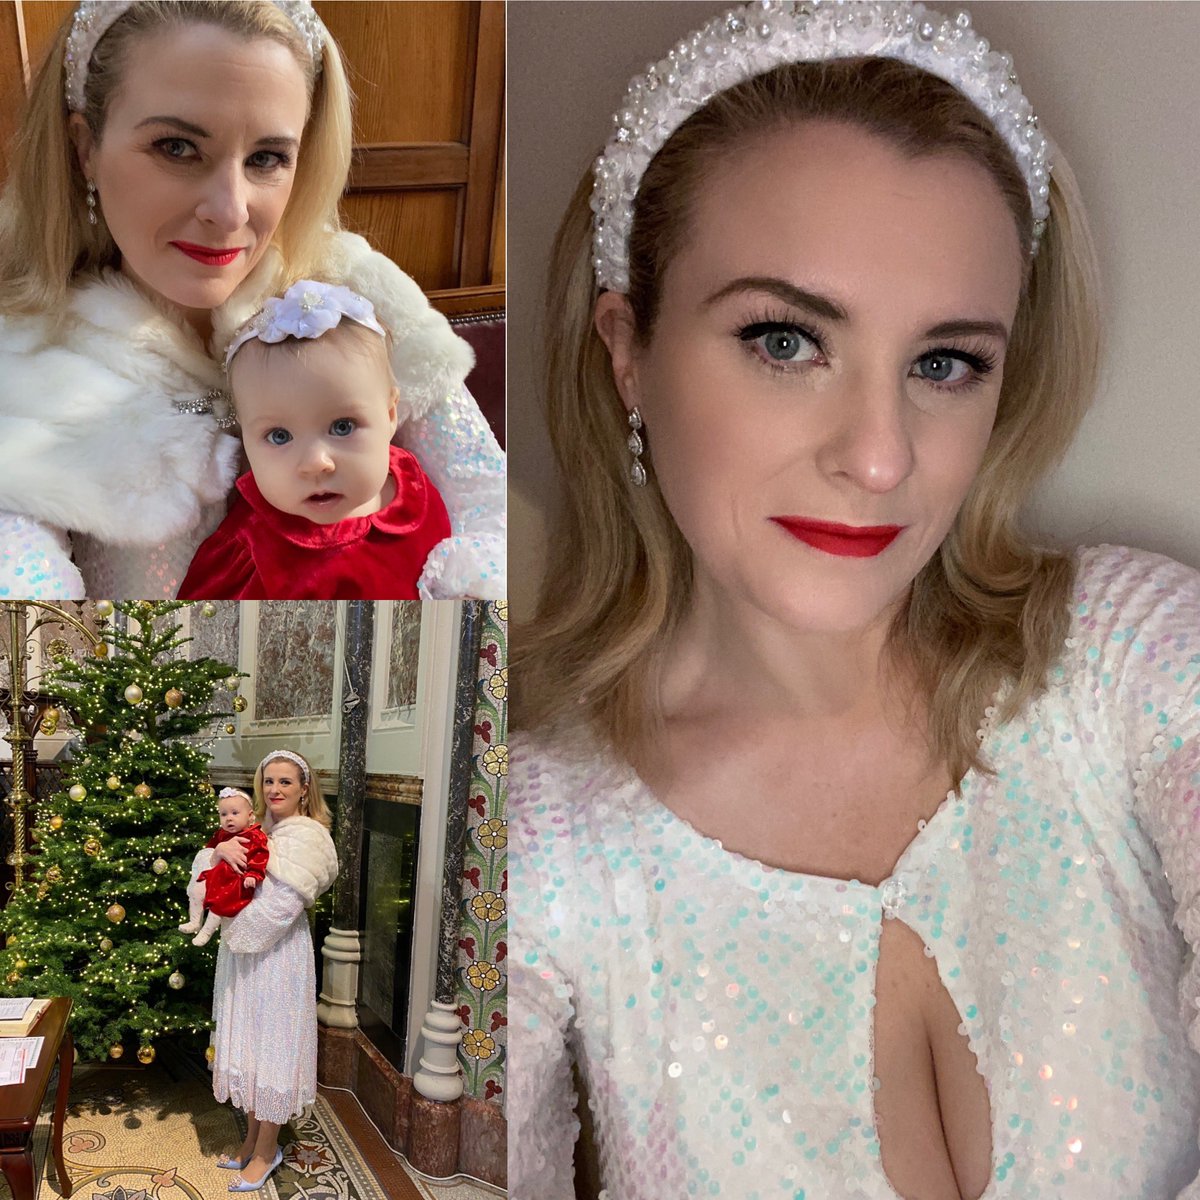 #sundaystyle and #christmasstyle all wrapped in one today! Happiest of christmasses to you all! #soprano #christmas #sparkles